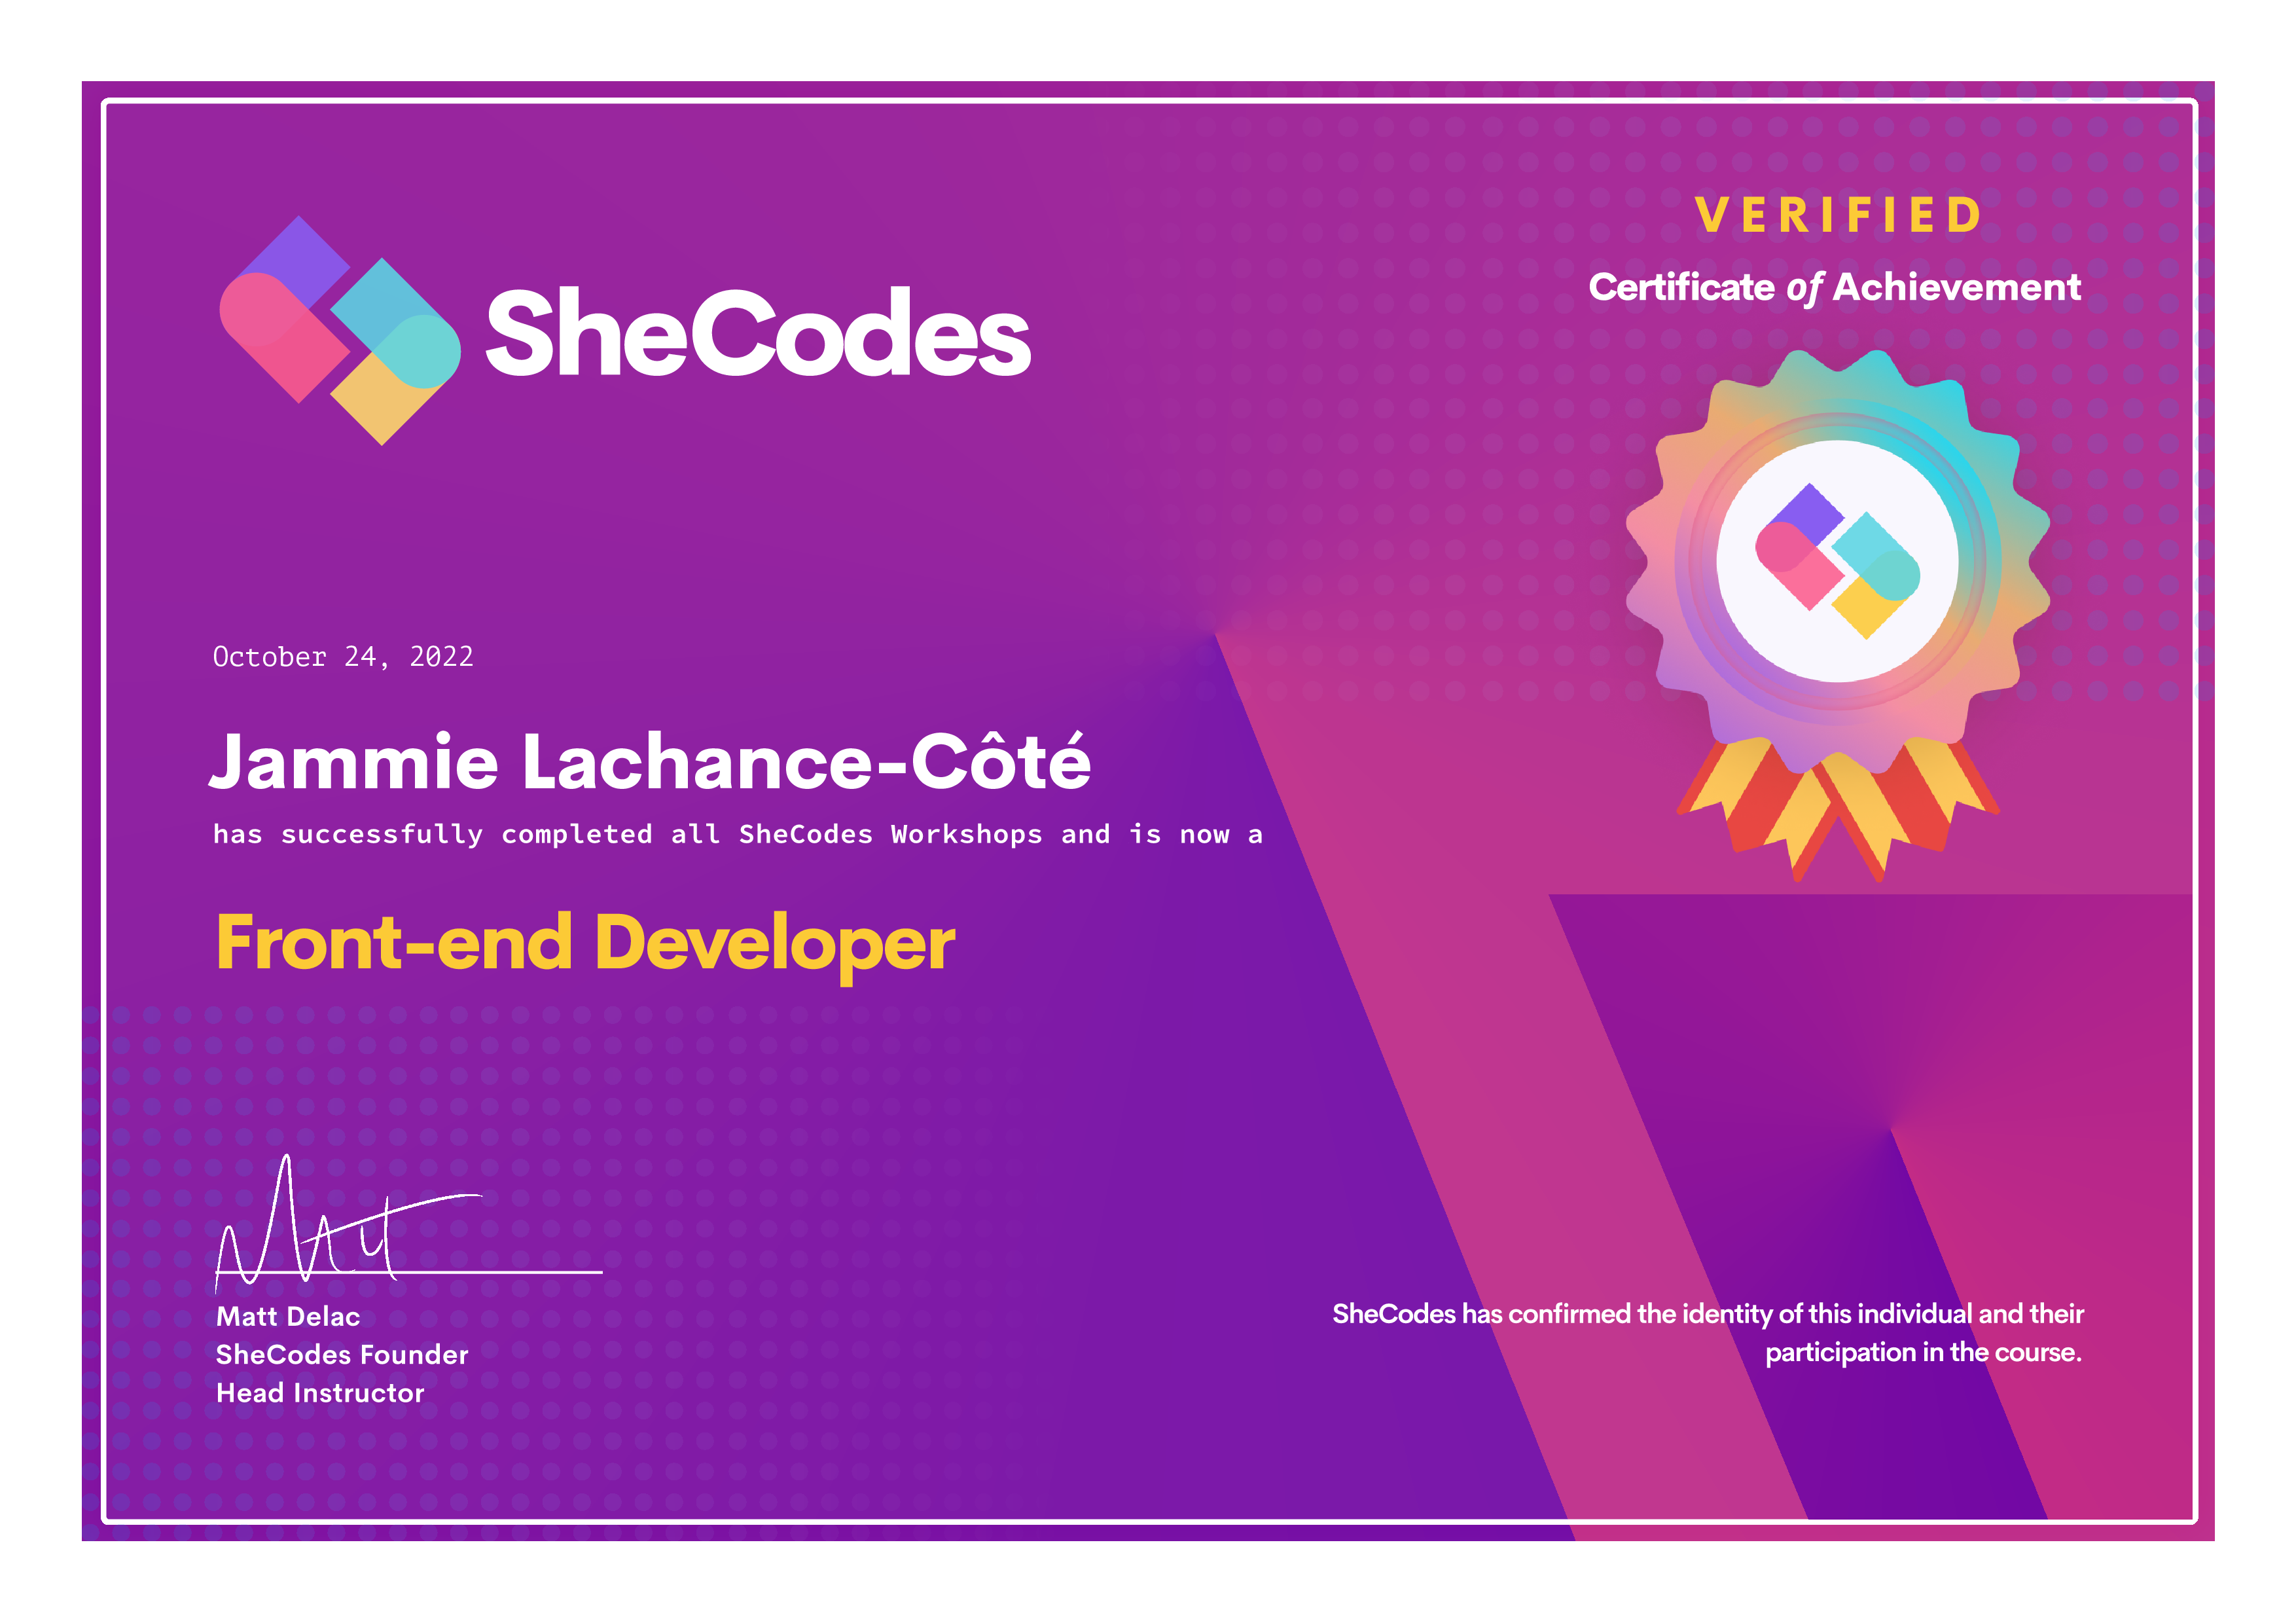 SheCodes